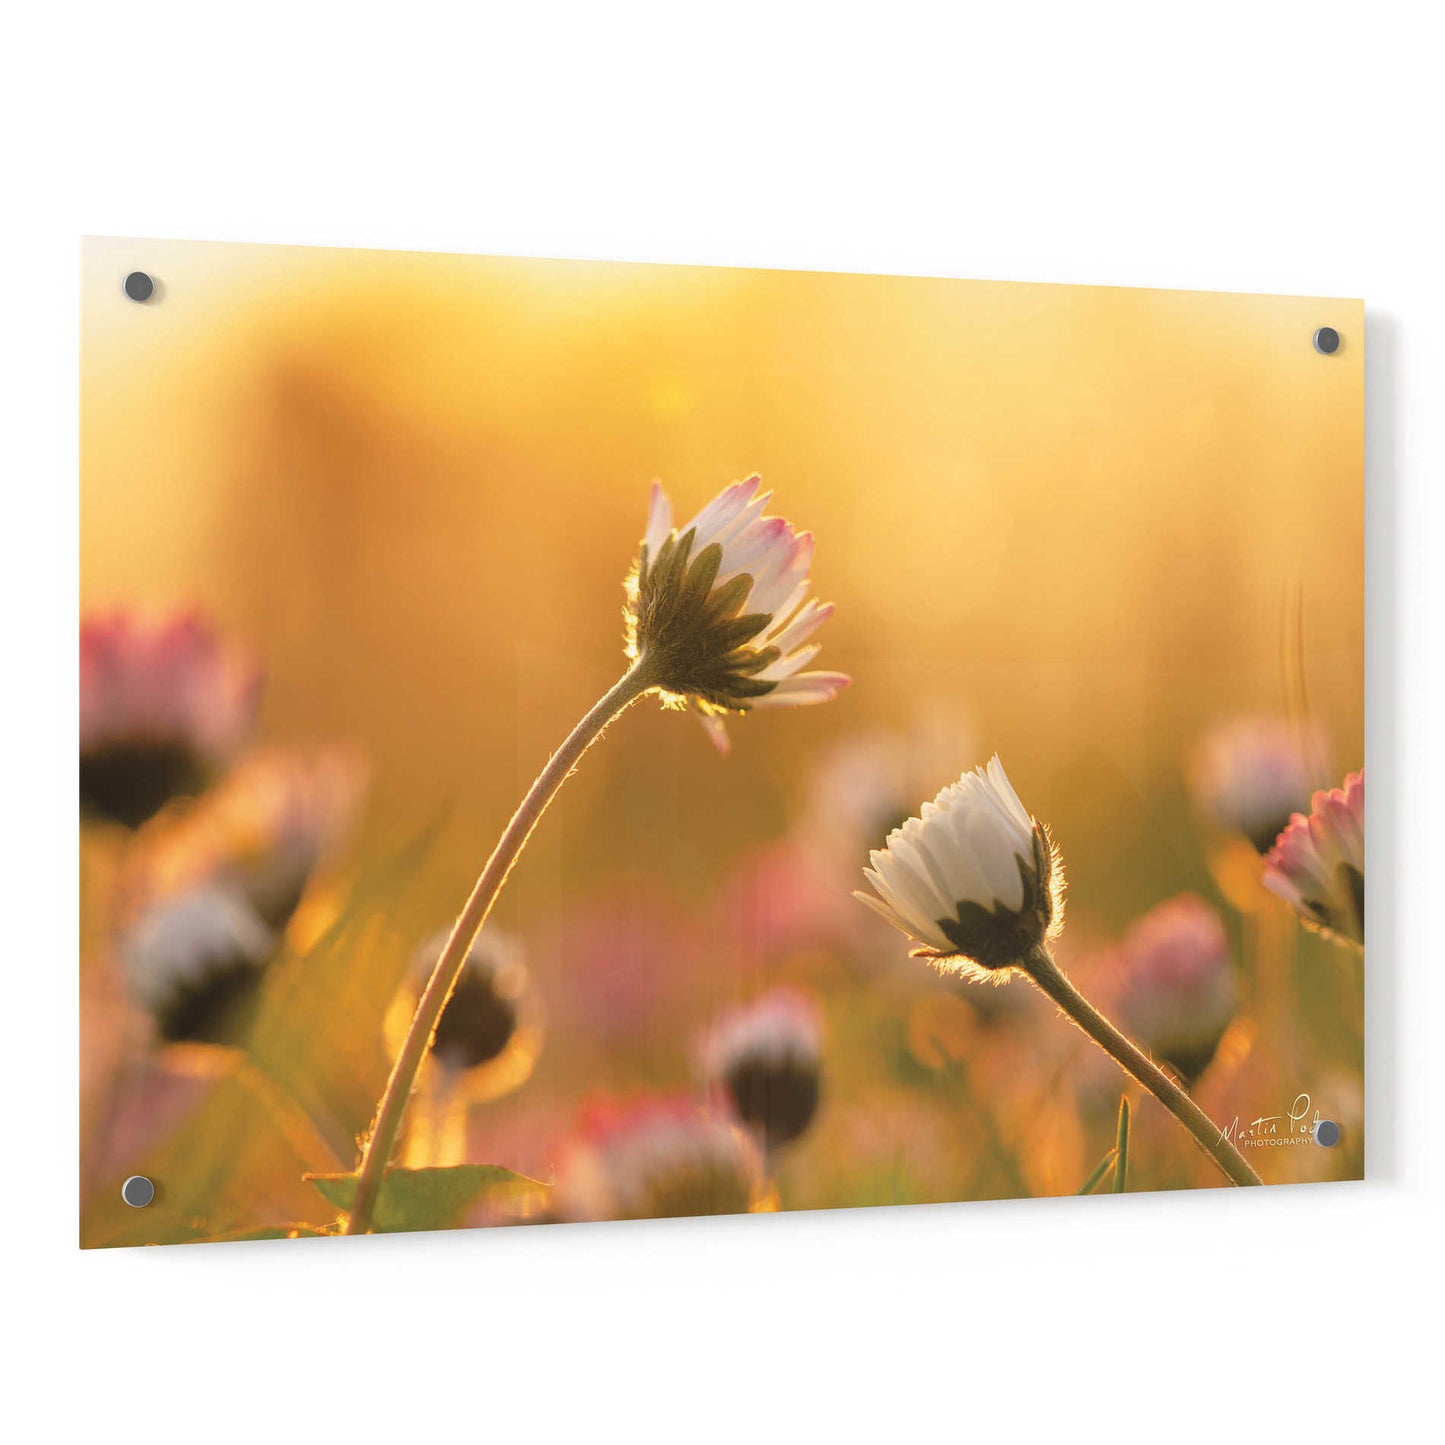 Epic Art 'Daisies' by Martin Podt, Acrylic Glass Wall Art,36x24